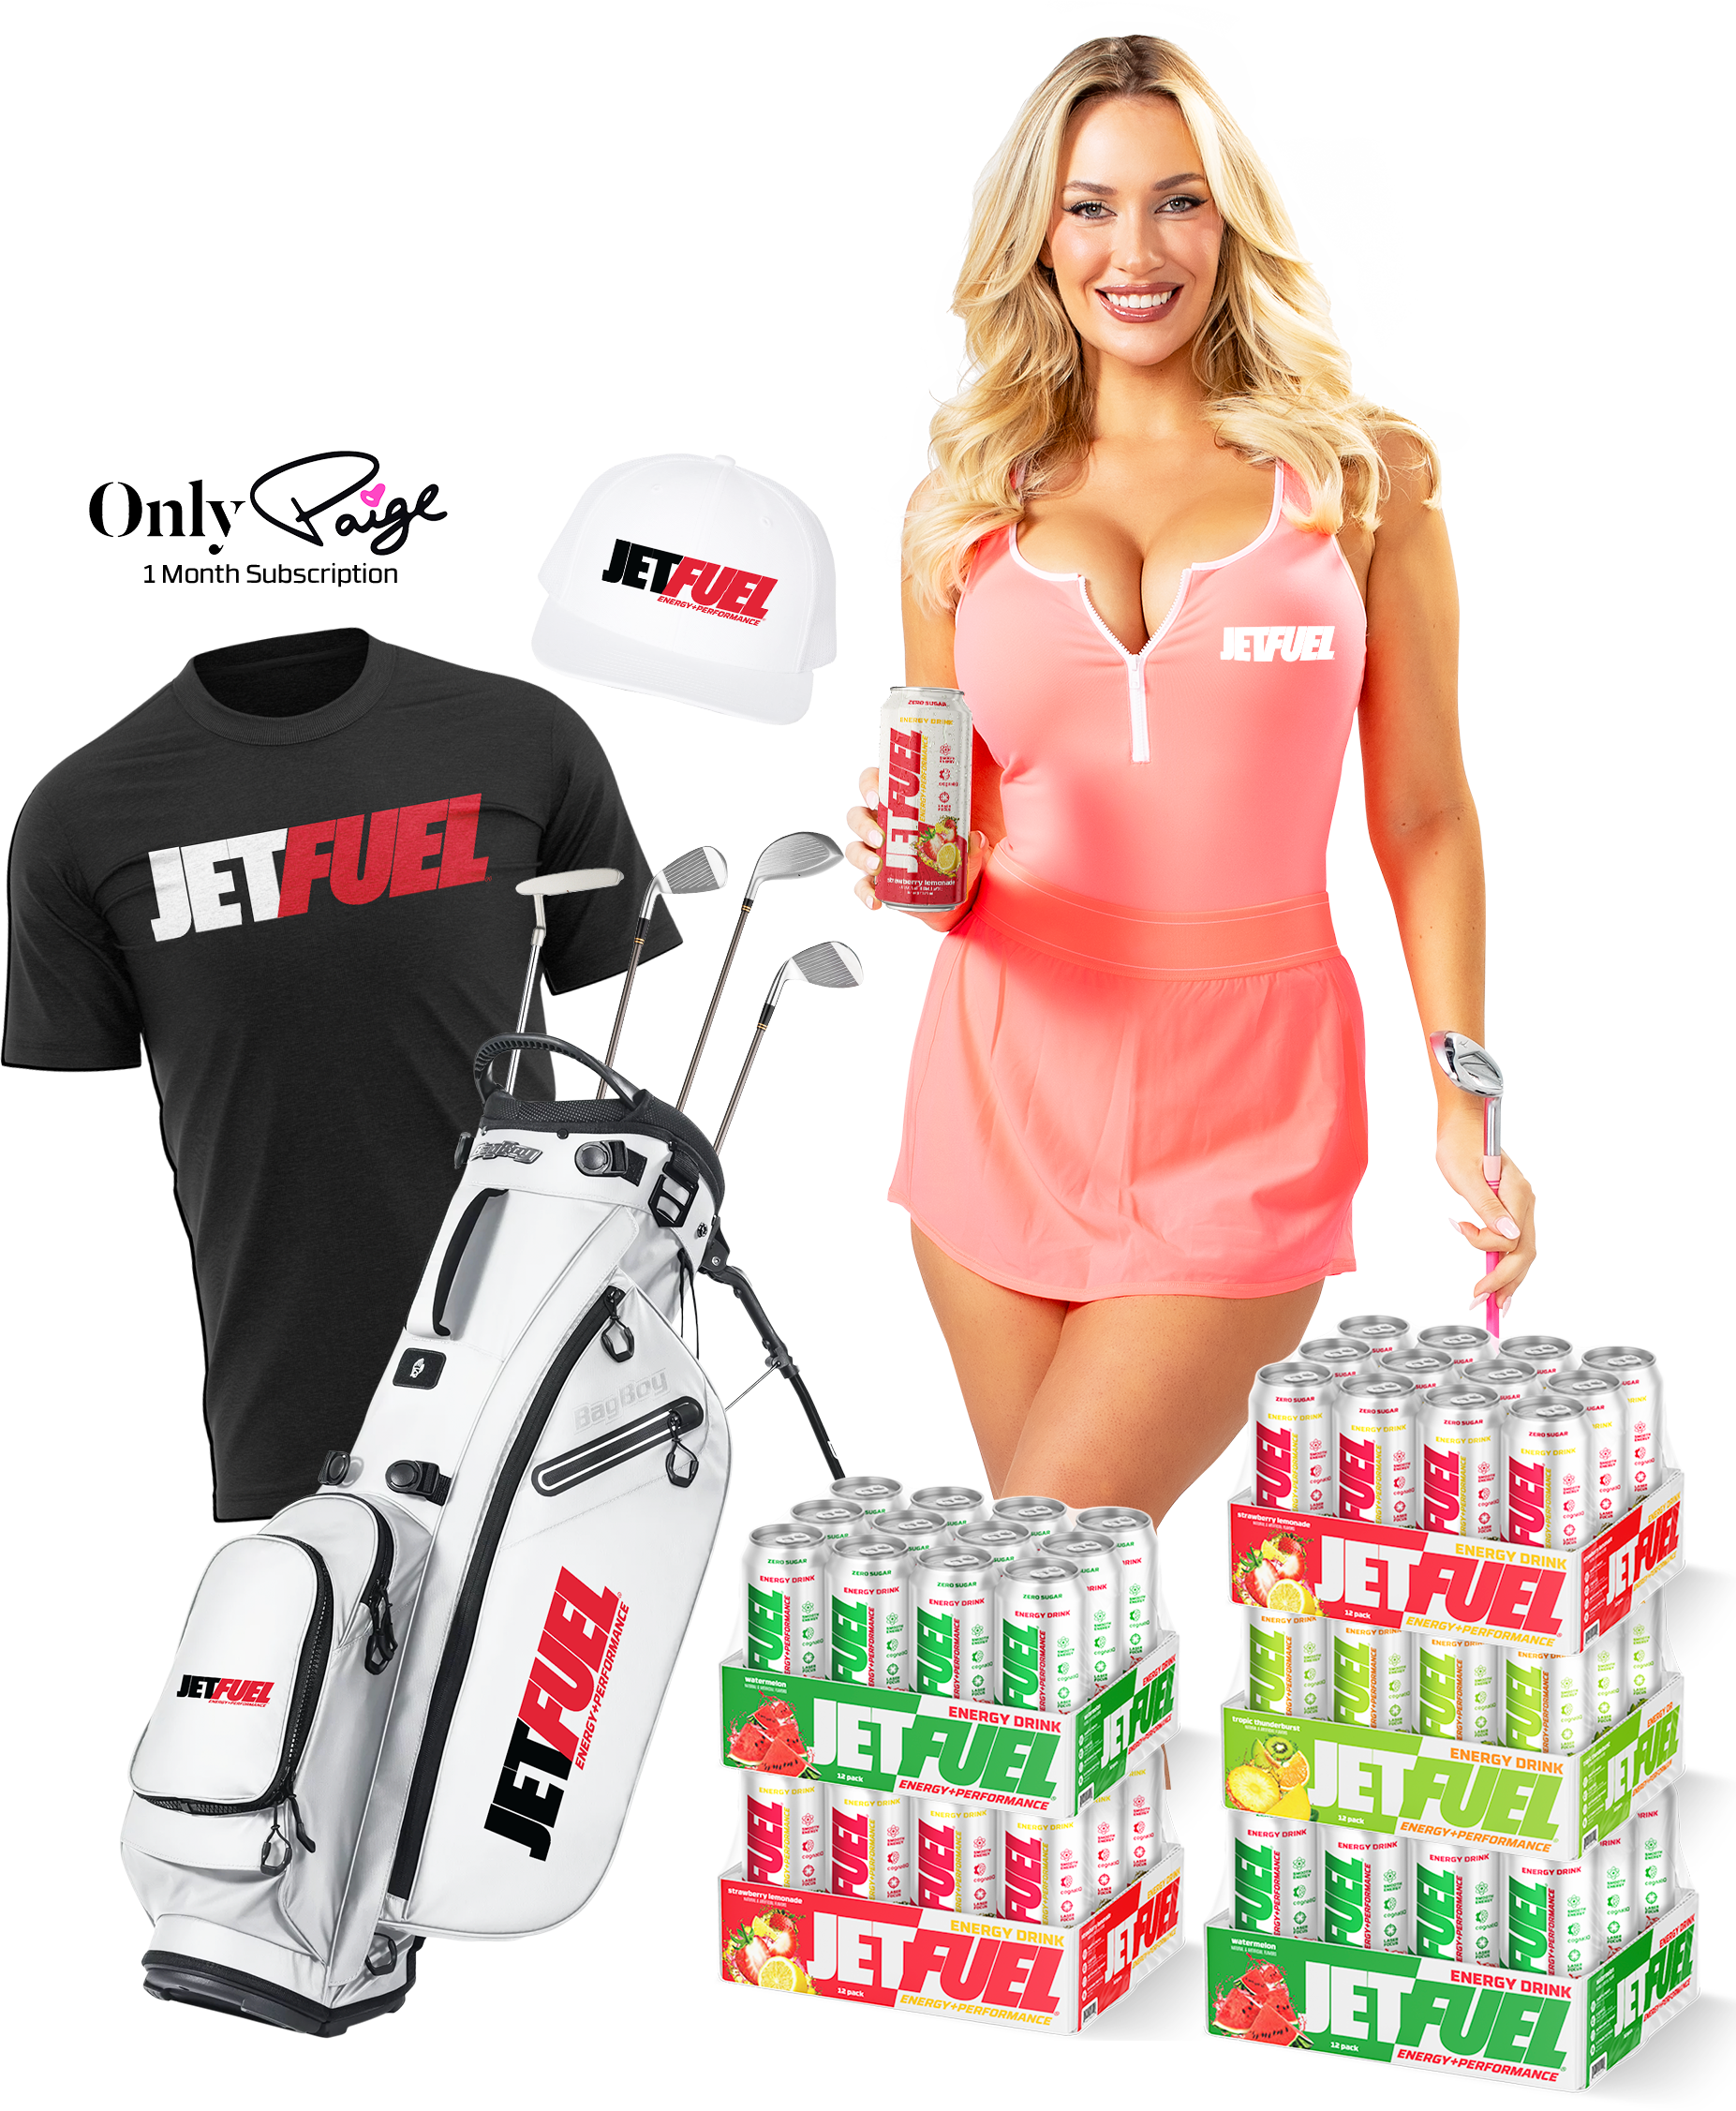 Paige Spiranac pictured with JetFuel Energy RTD trays, T-shirt, Hat, and a Golf Bag with clubs